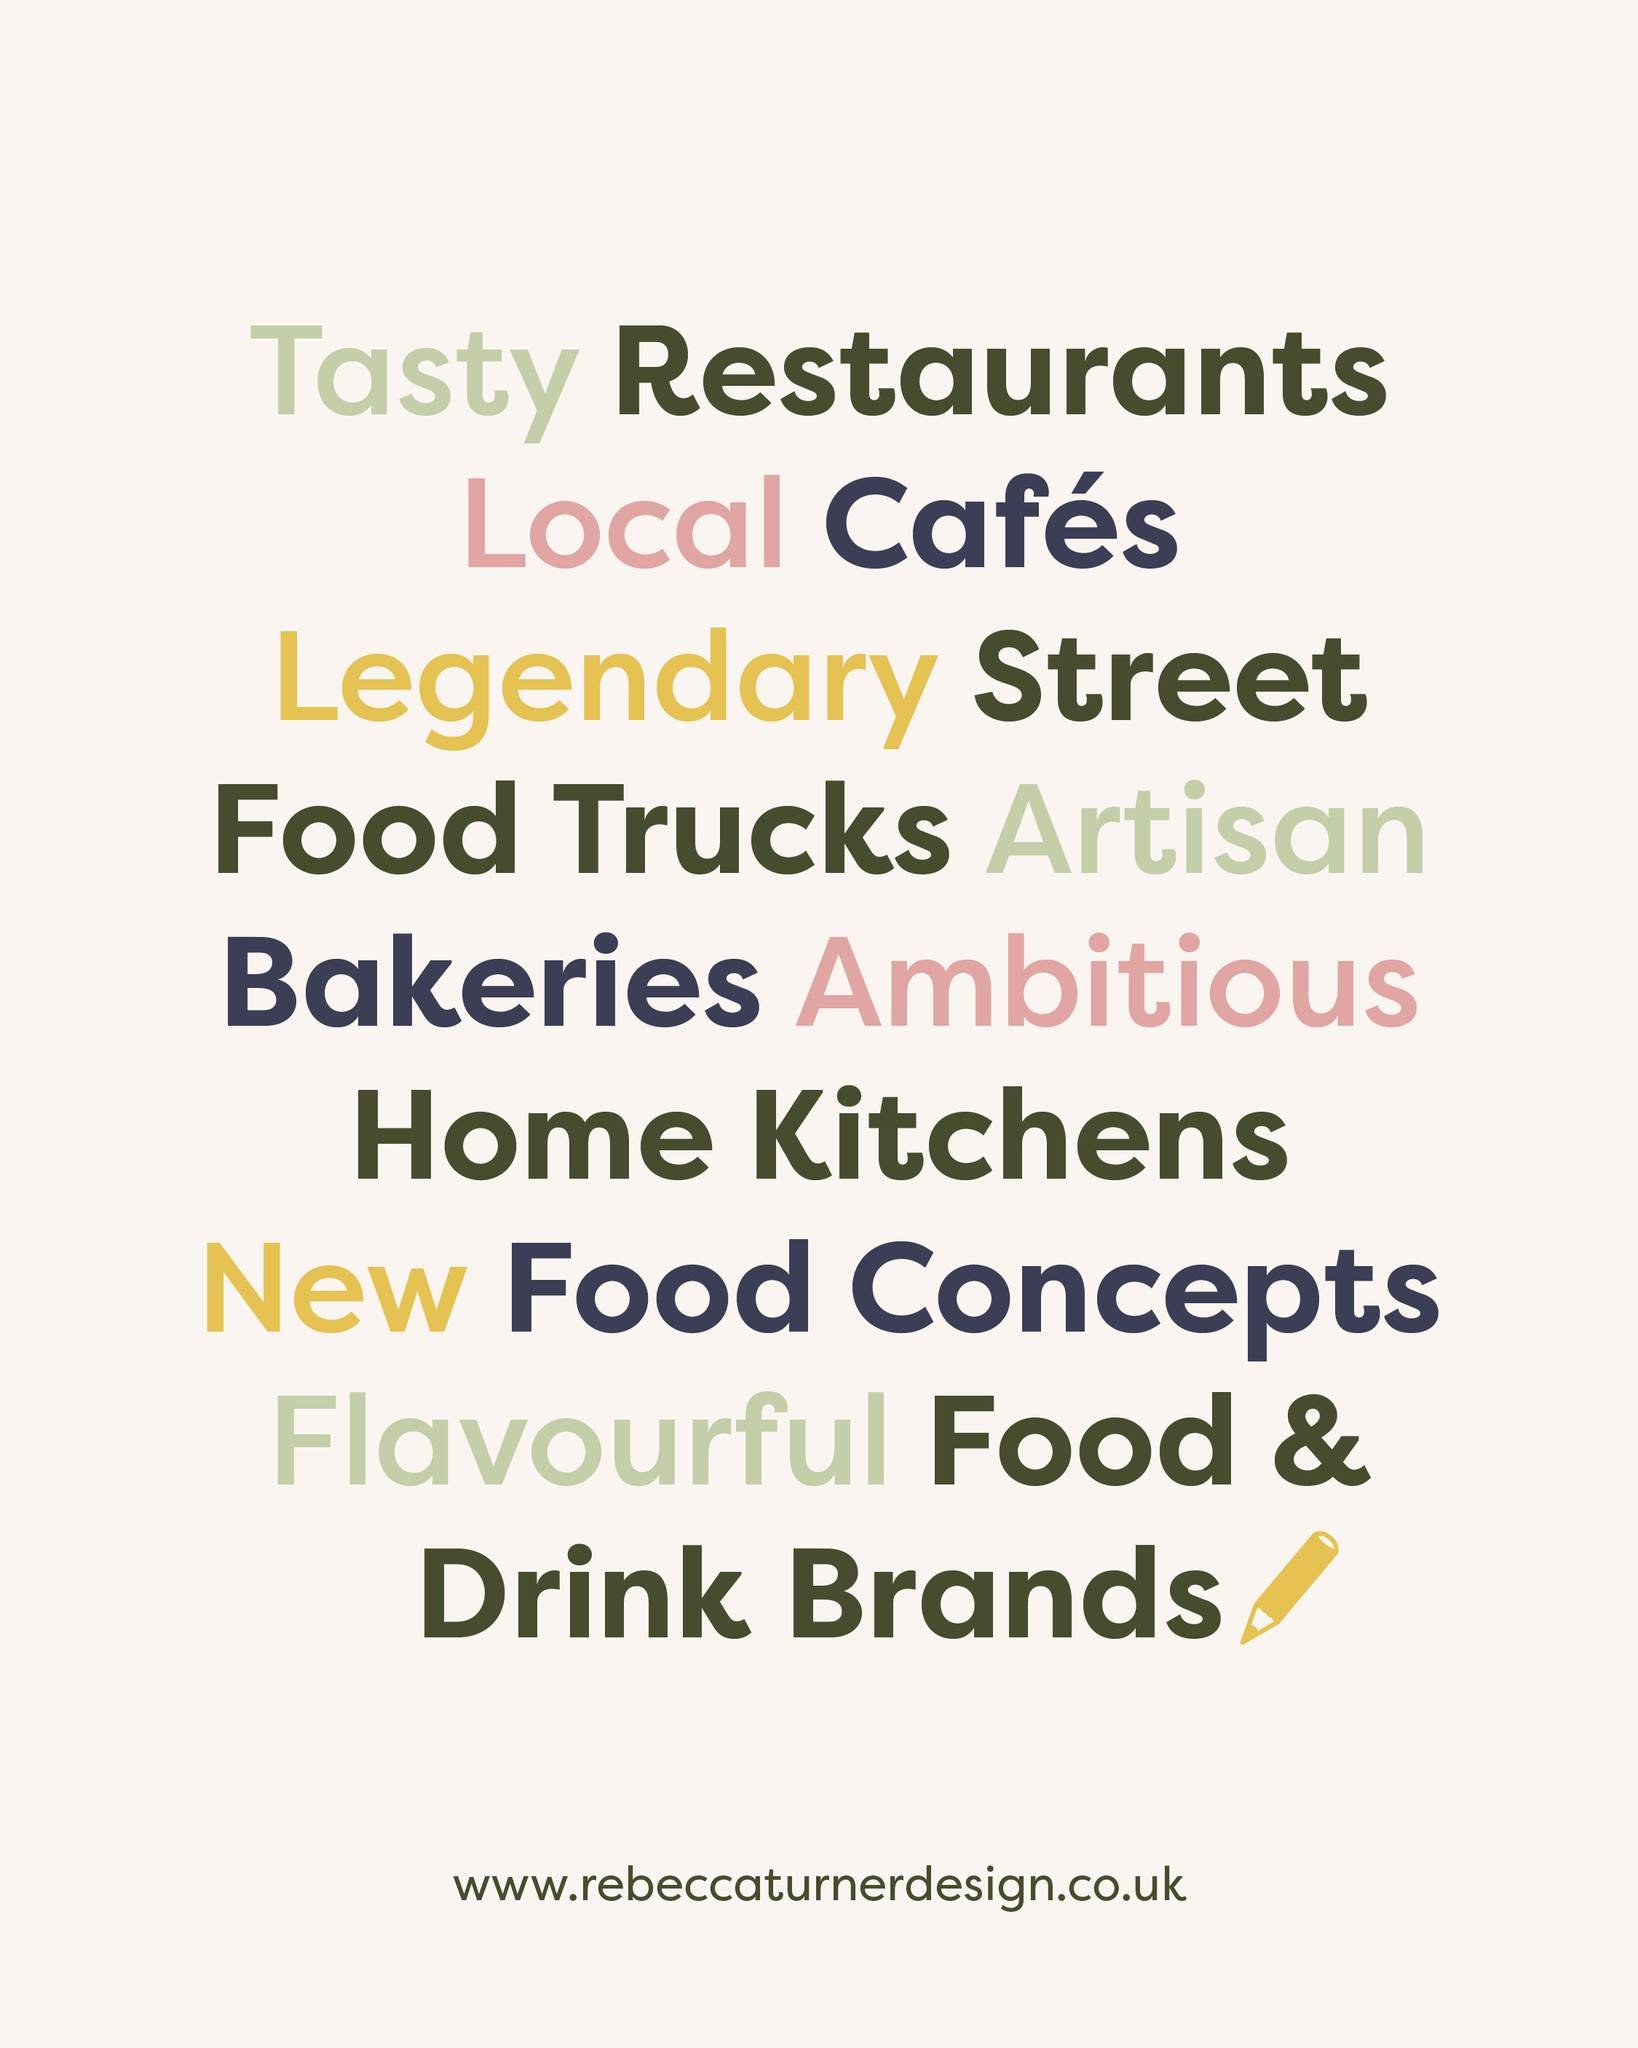 My design services are aimed food and drink brands and the hospitality industry, from start ups to medium sized businesses which are ready to level up their branding, packaging and marketing. ✏️

I provide custom made design packages just for *your* 